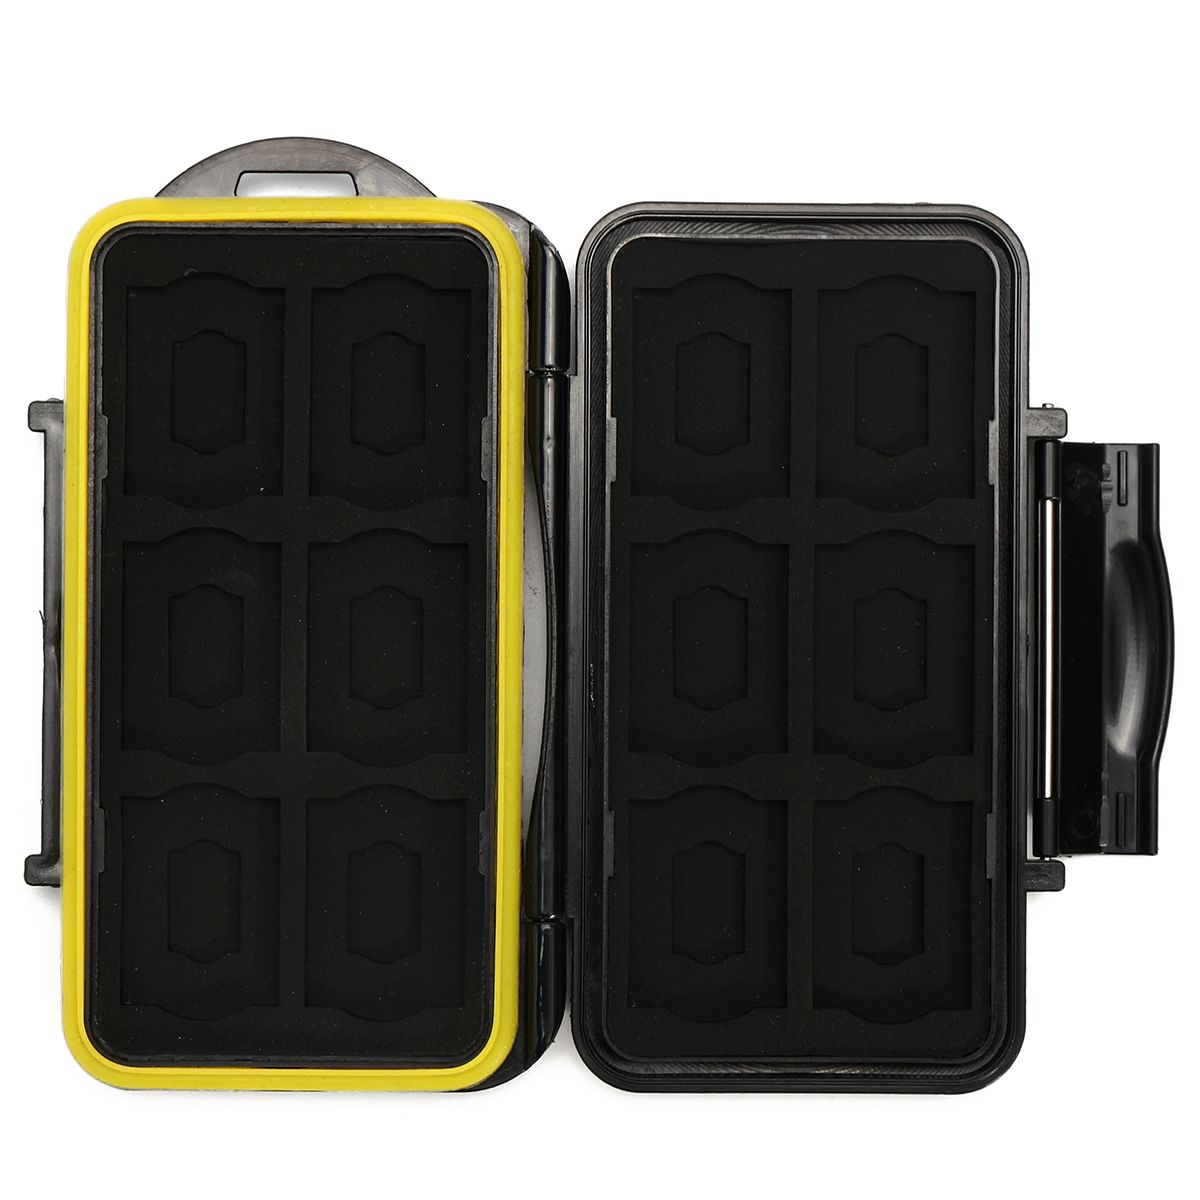 Waterproof-Memory-Card-Case-Box-Protector-Hard-Pouch-Support-12-SD-12-TF-Micro-SD-Card-1360893